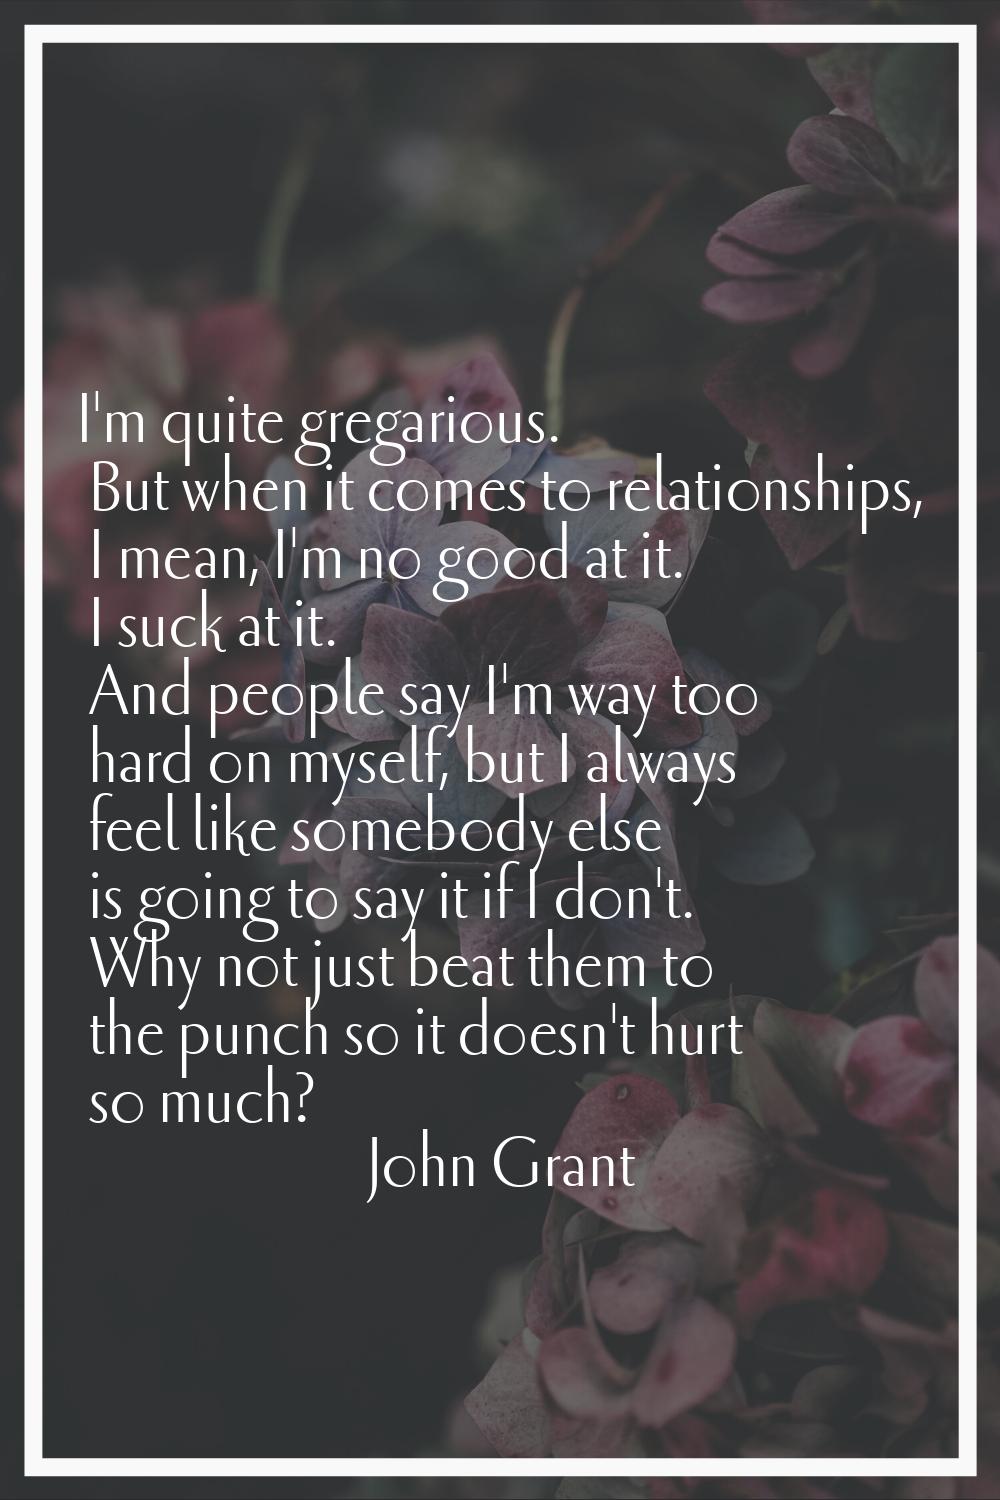 I'm quite gregarious. But when it comes to relationships, I mean, I'm no good at it. I suck at it. 